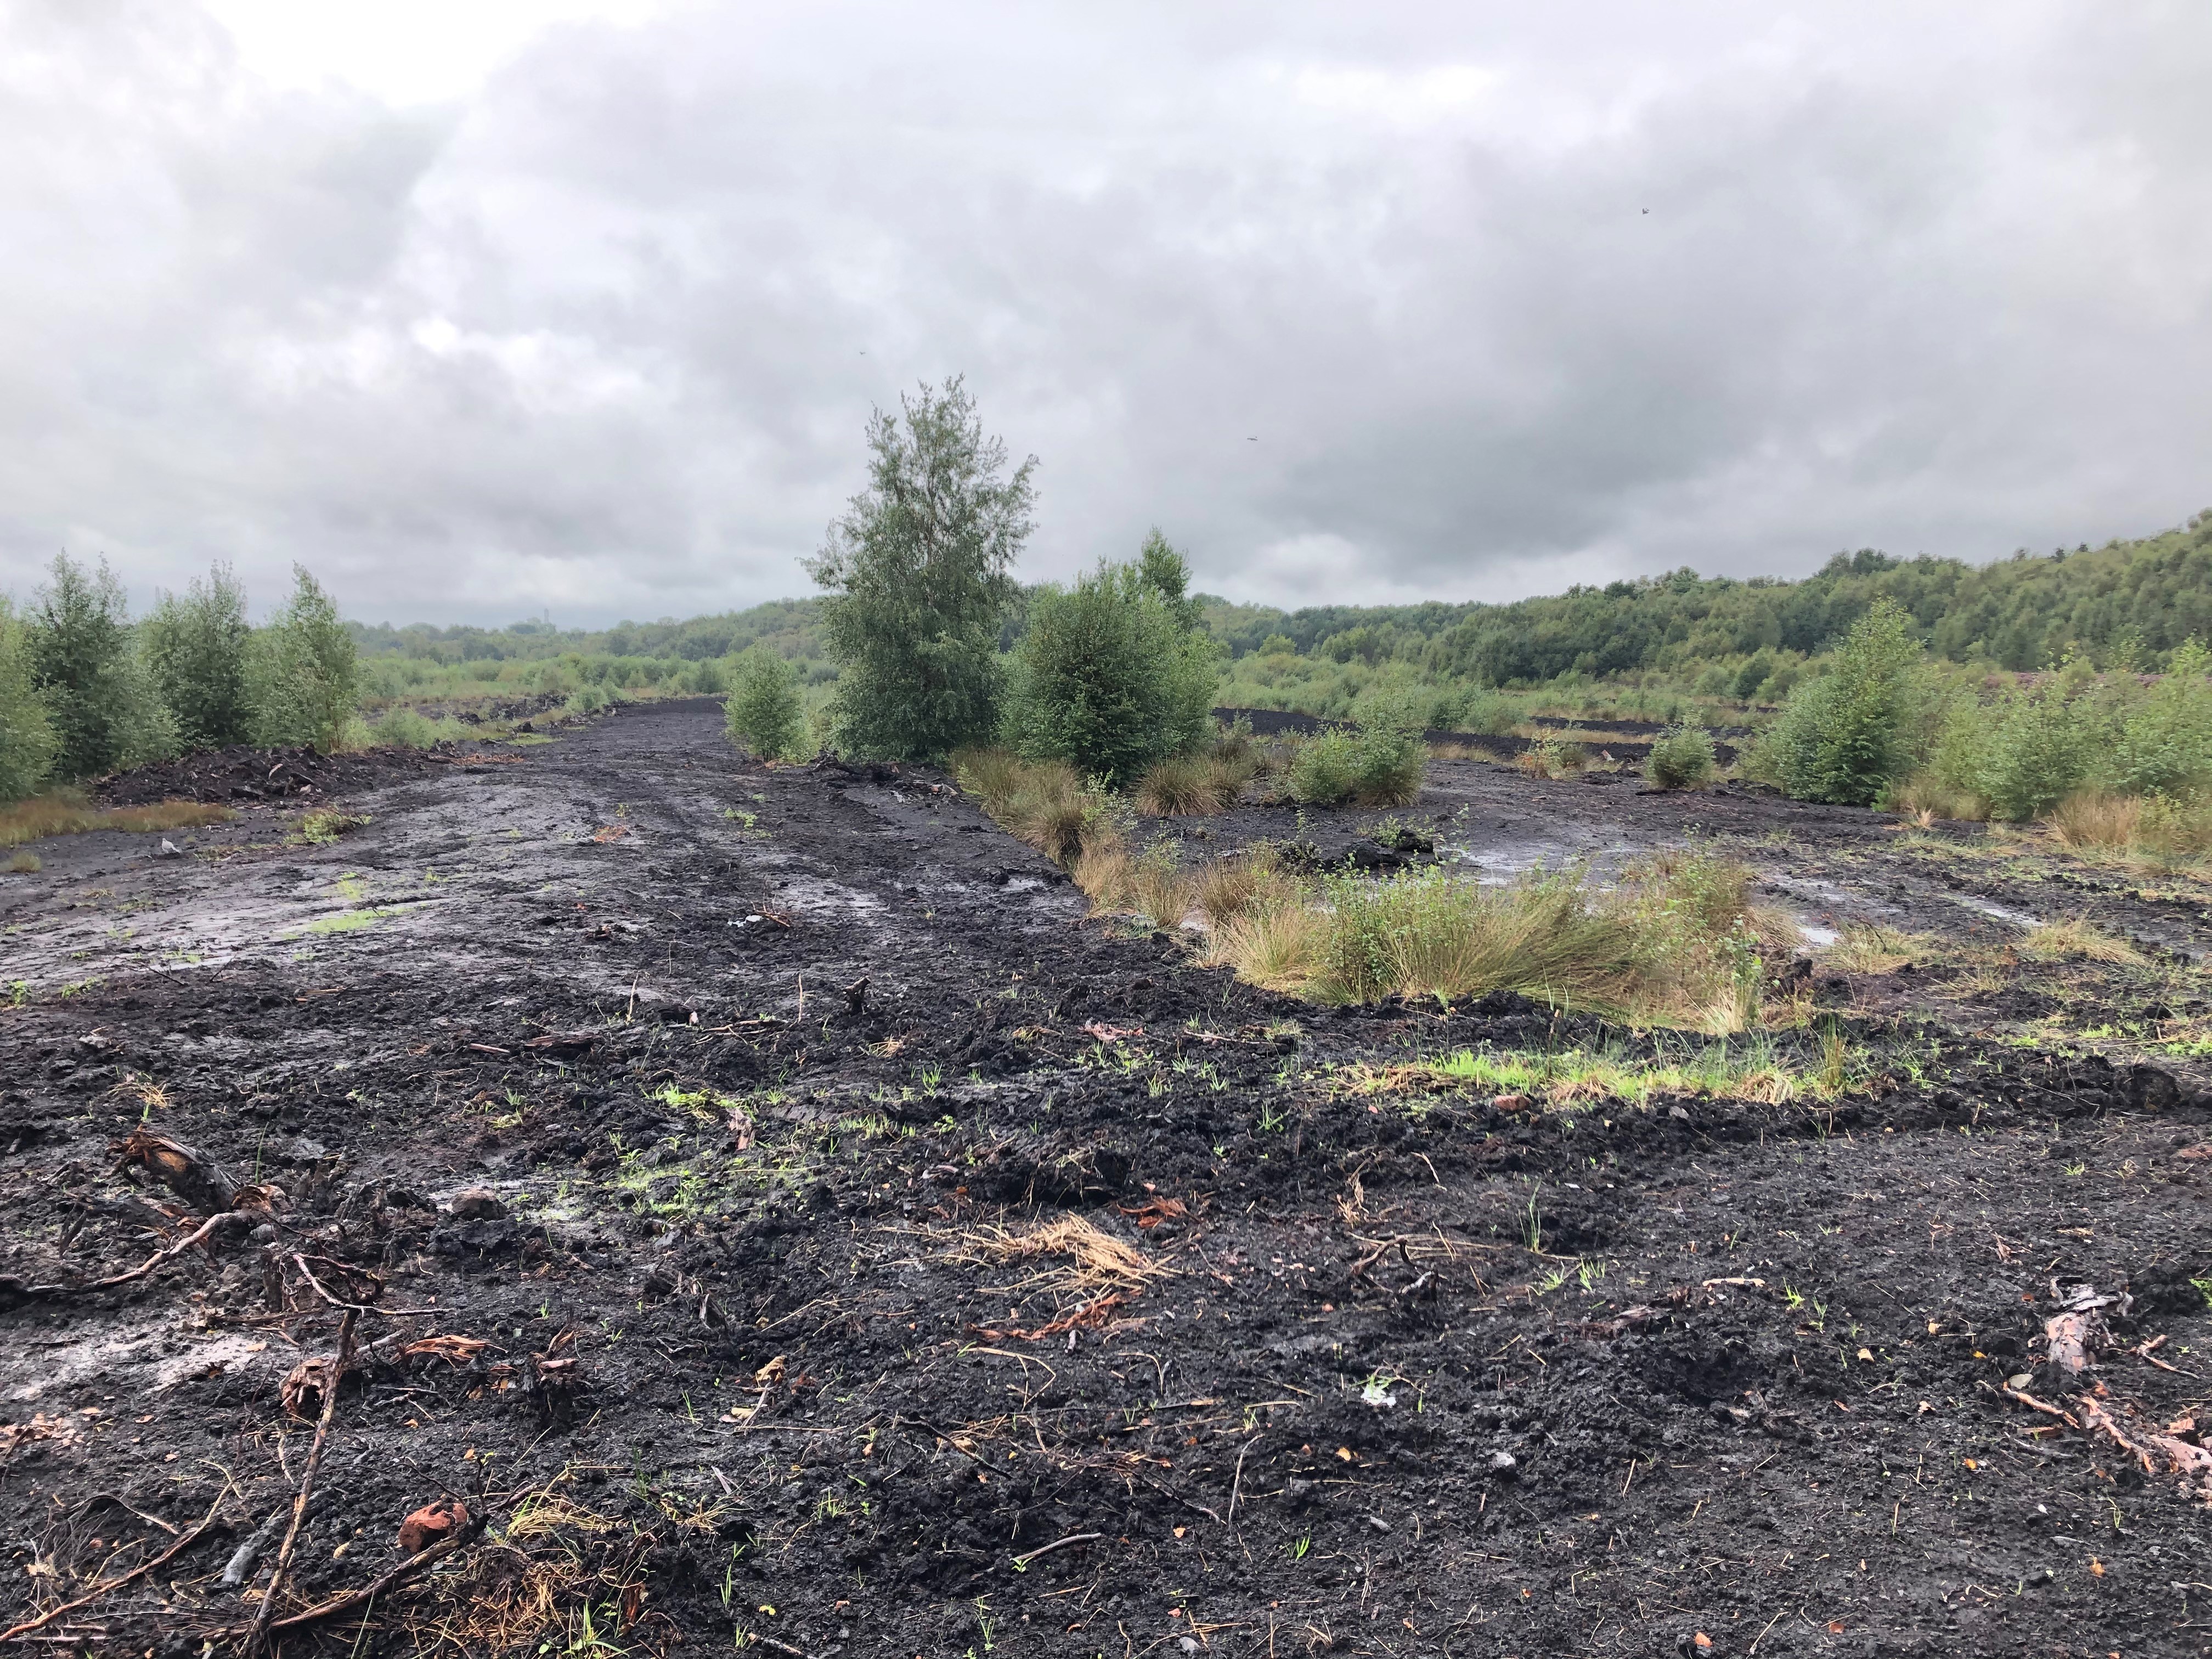 Most of England's peatlands are damaged, degraded and drained which means they are emitting carbon dioxide (Emily Beament/PA)